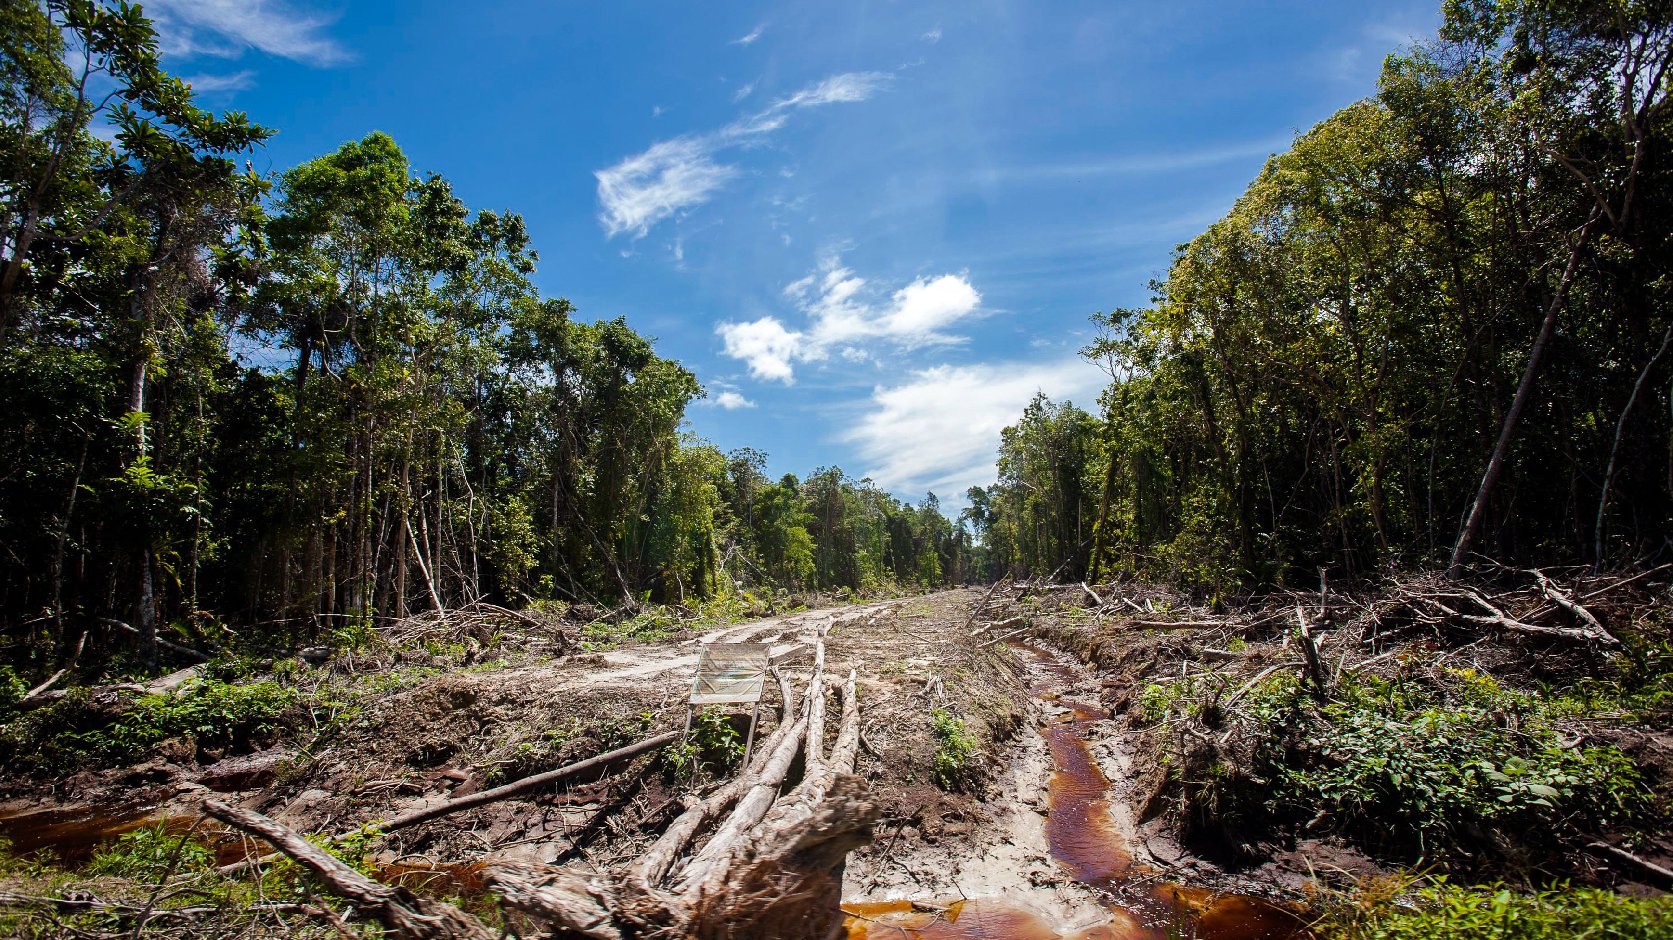 An access road is constructed in a peatland forest being cleared for a palm oil plantation on Indonesia's Sumatra island in 2013. Photo: Chaideer Mahyuddin/AFP/Getty Images